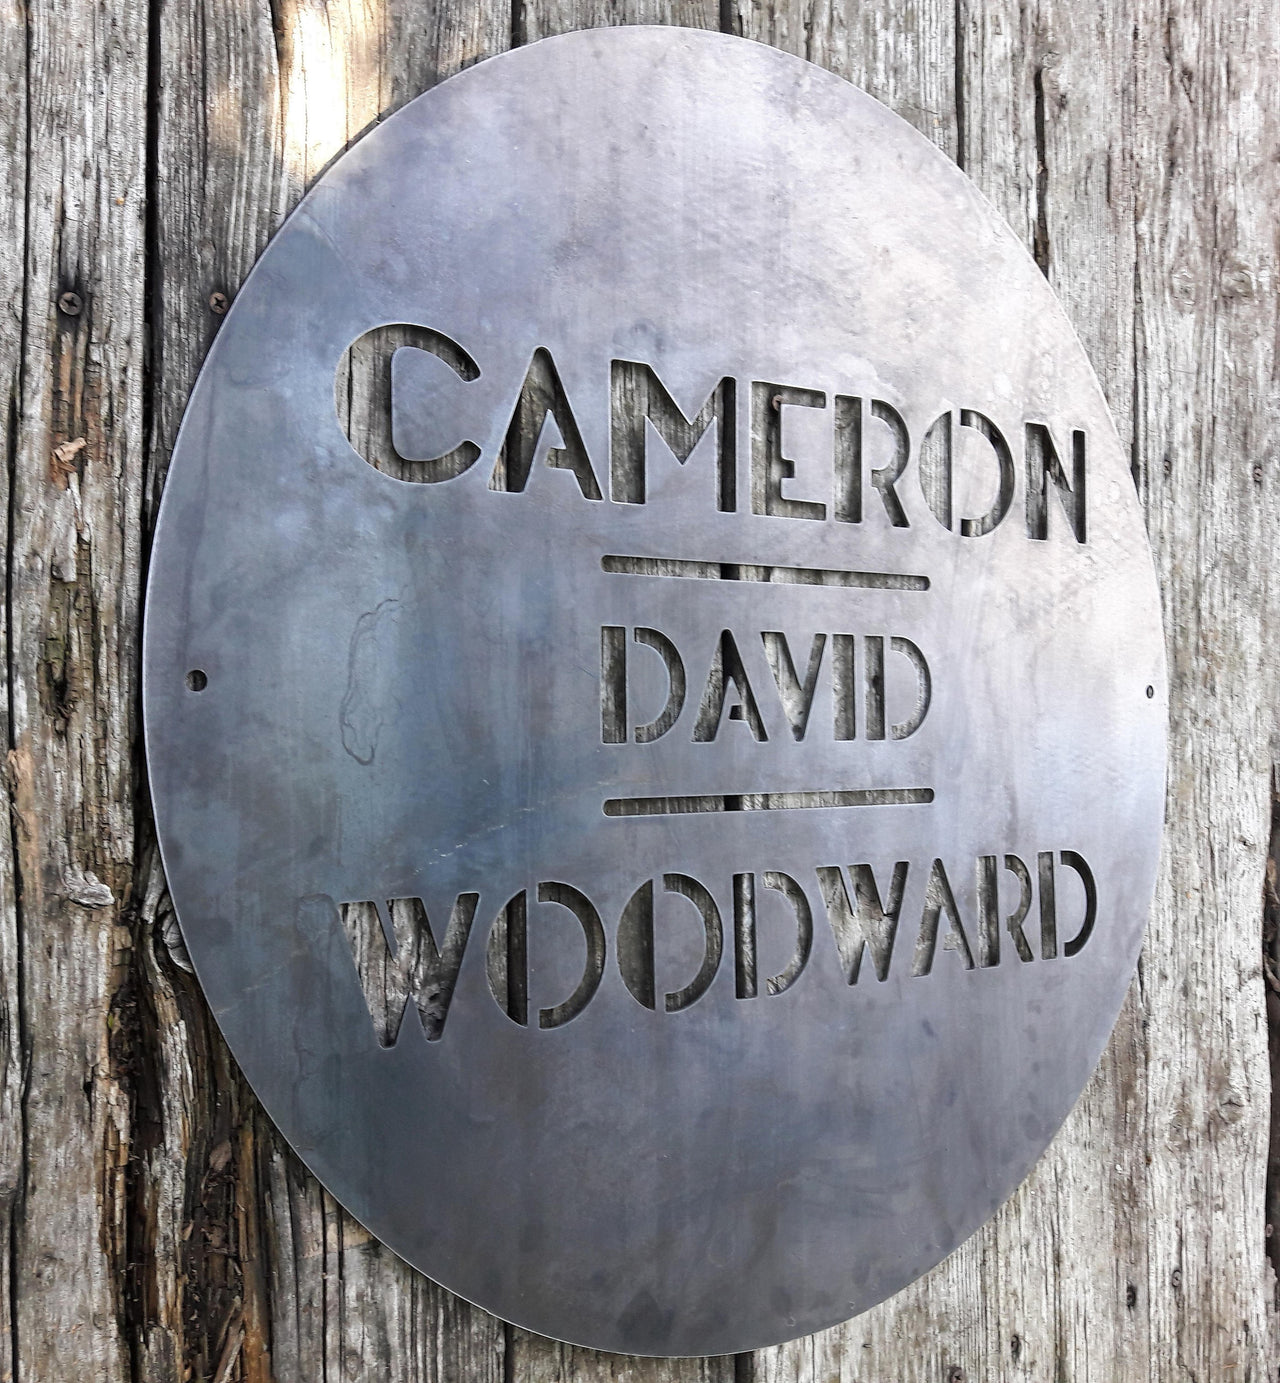 This is a round art deco sign that has three lines of text with a straight line seperating them. The sign reads, "Cameron David Woodward"